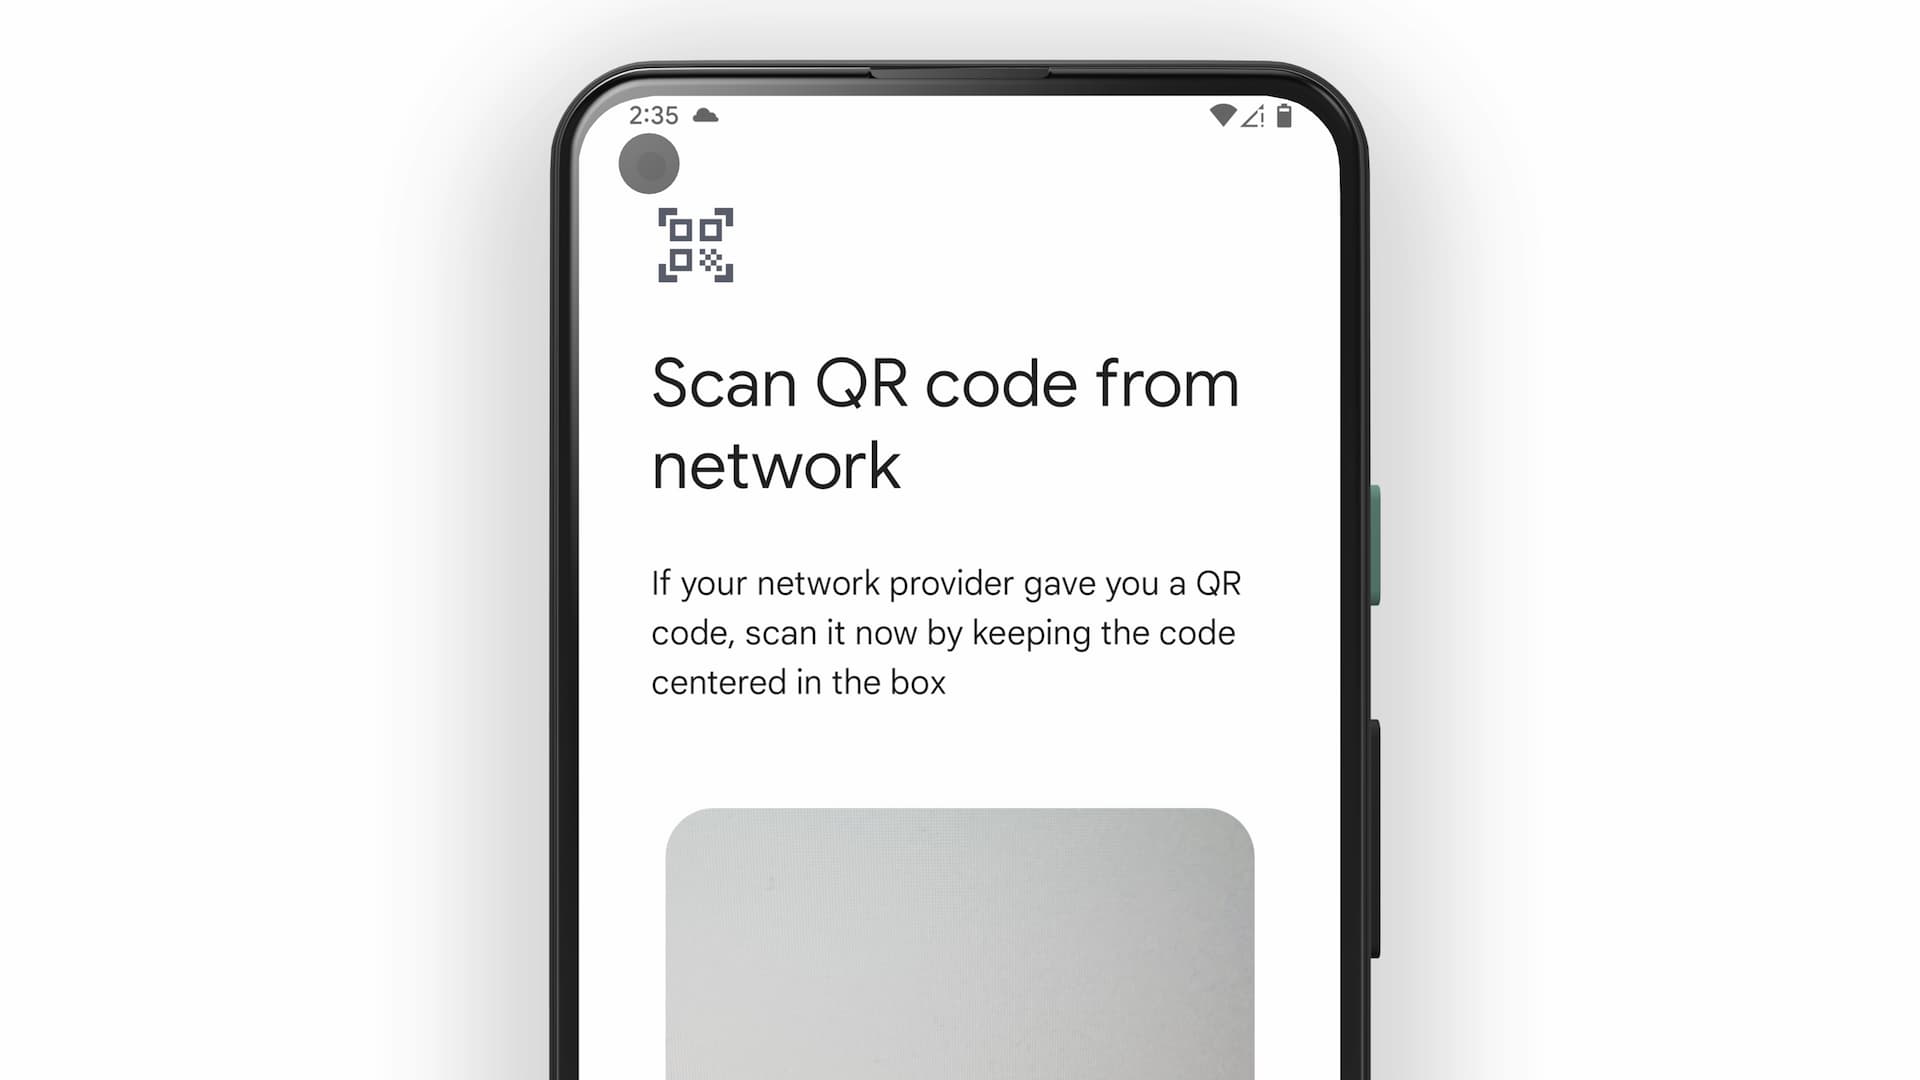 How to install eSIM on Android phone using QR code